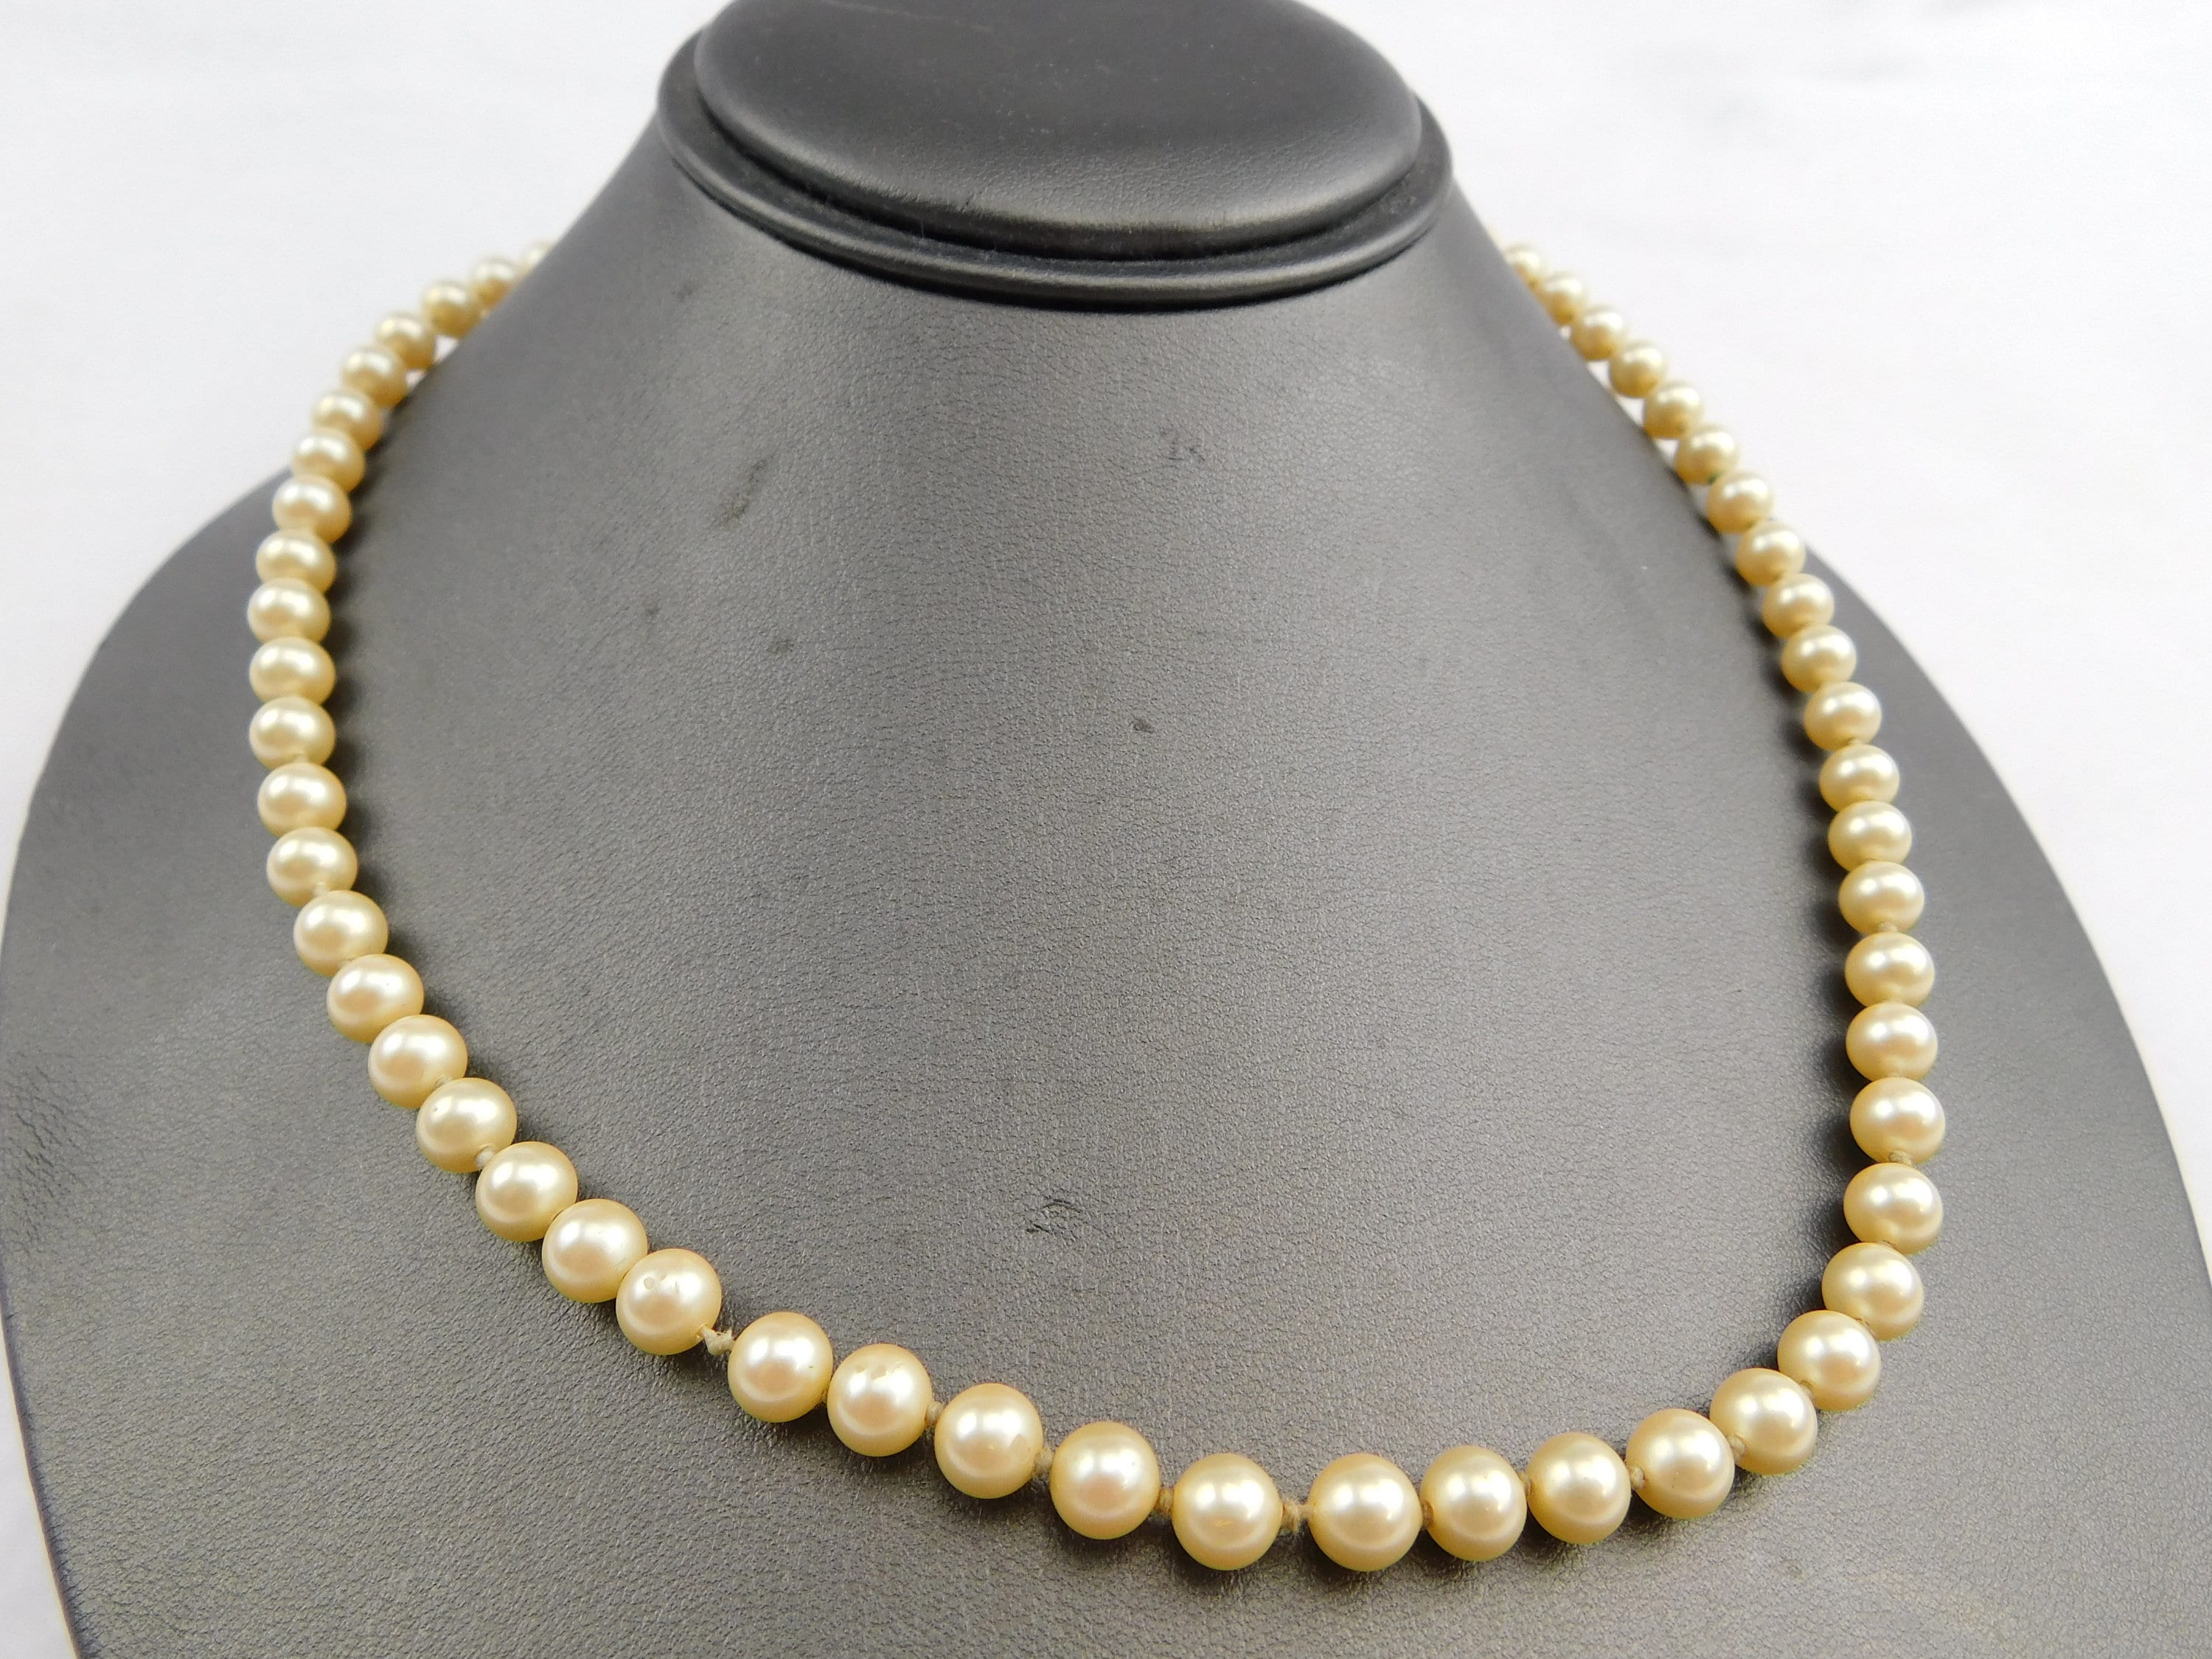 12mm Faux Pearl Necklace & Length - Kezef Creations